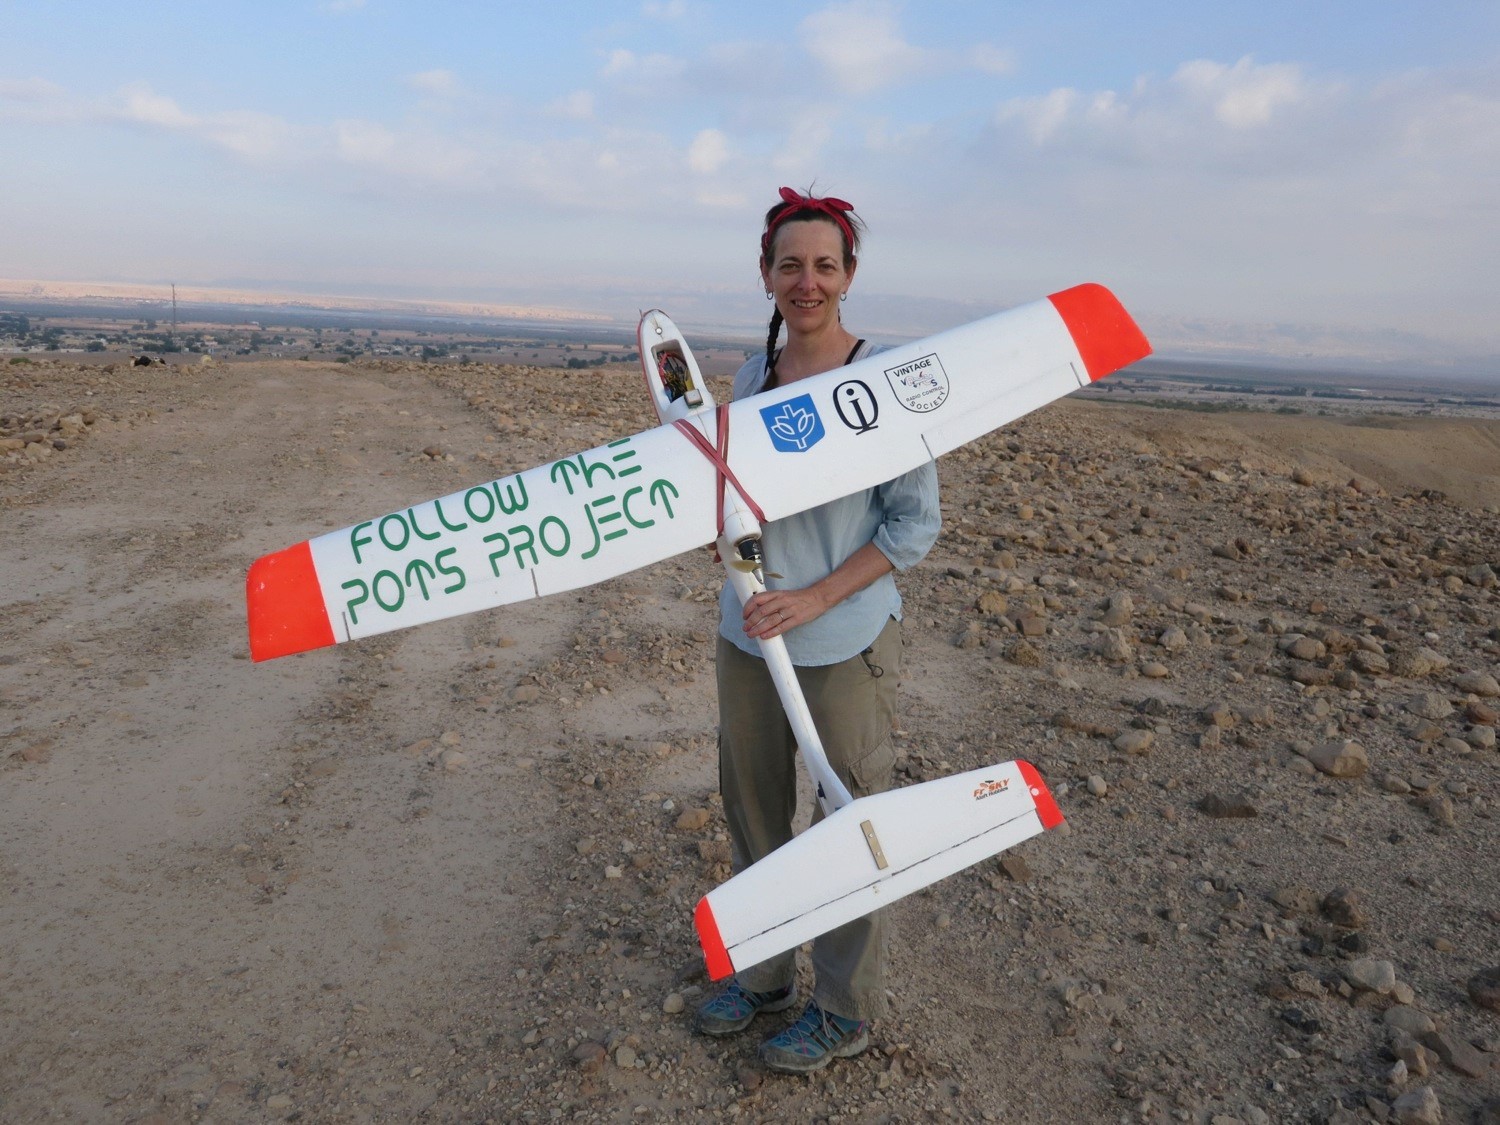 Morag M. Kersel with fixed wing drone